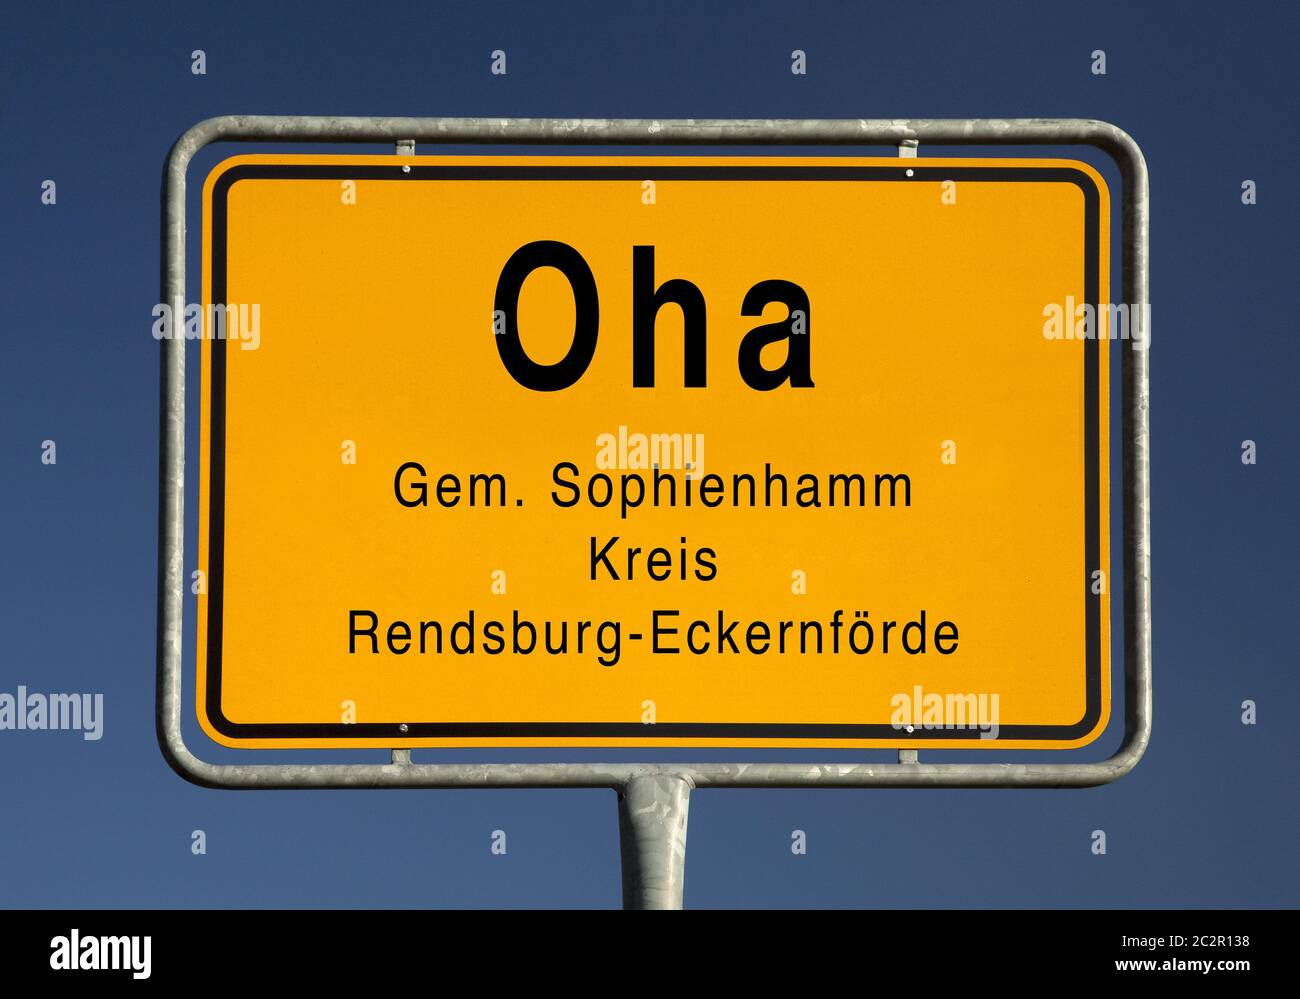 City limits sign of Oha, district of the municipality Sophienhamm, Rendsburg-Eckernförde, Germany Stock Photo